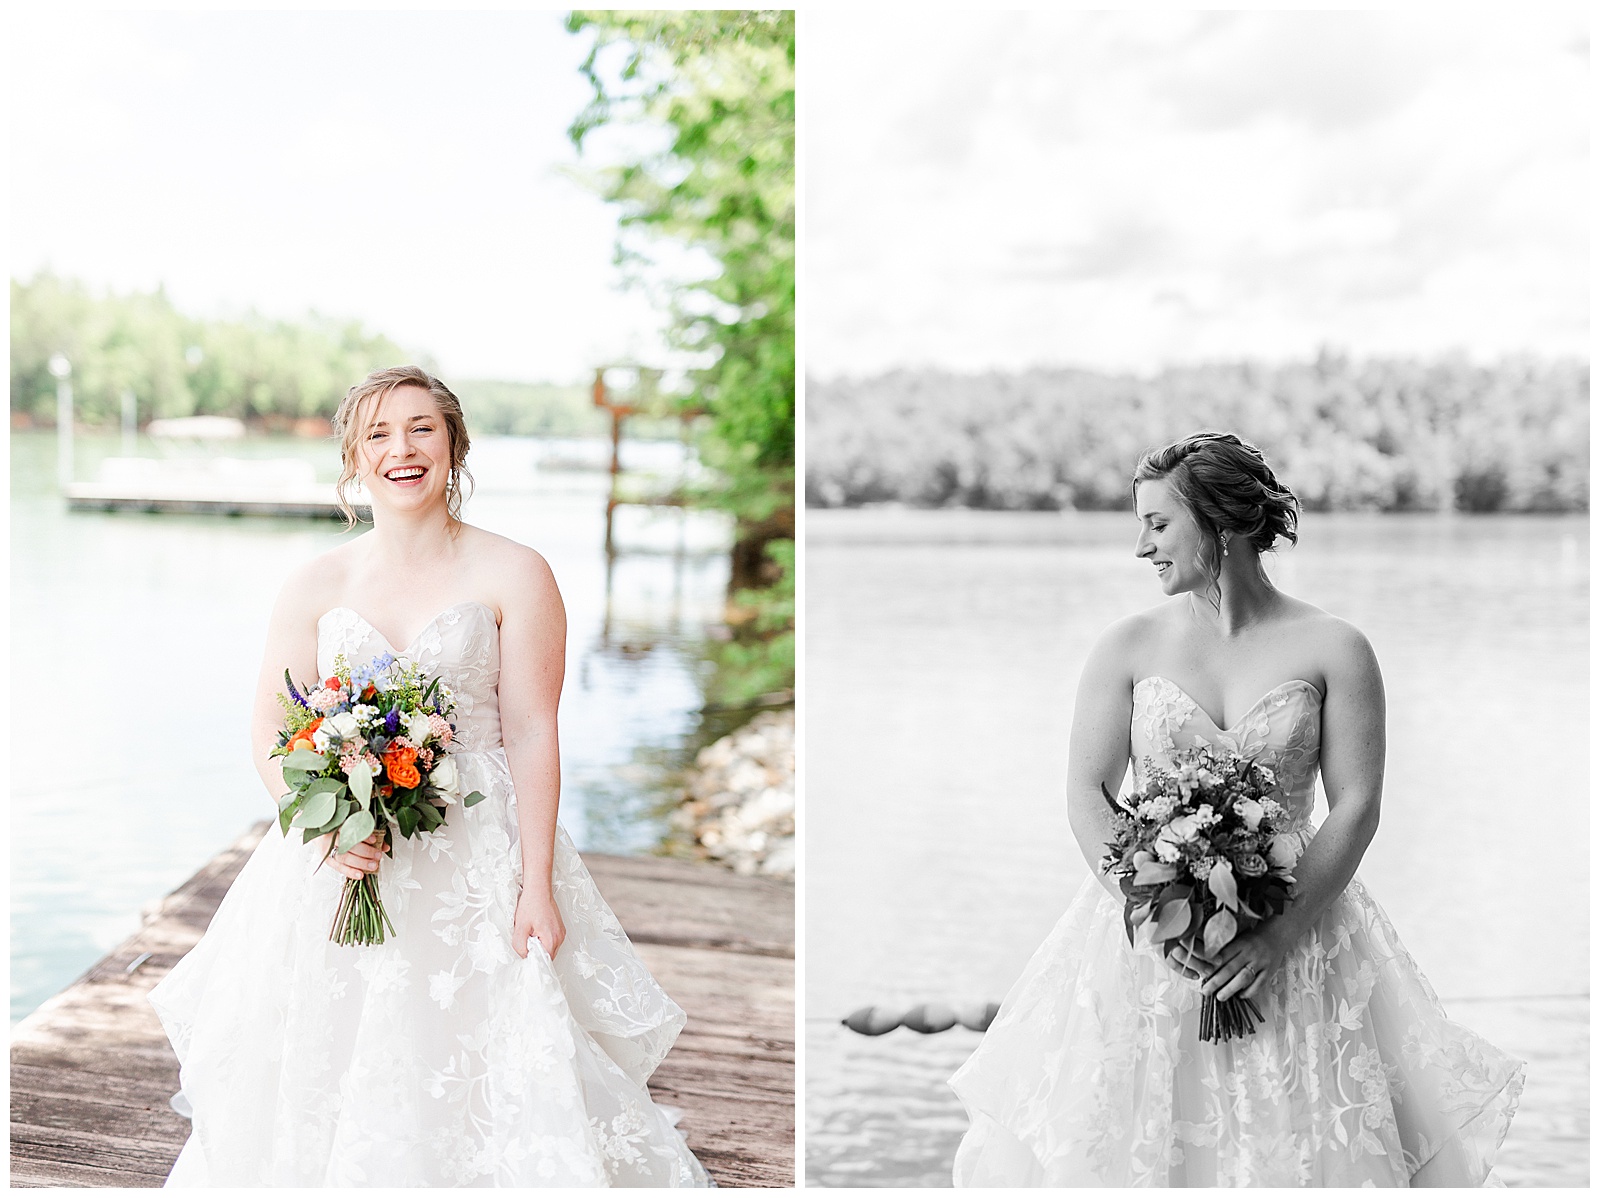 pier on the water location 👰 Bride: lace wedding dress + veil 💐 Colorful orange and blue bouquet 📸 Outdoorsy Lake and Mountain Bridal Session with Julia | Kevyn Dixon Photography